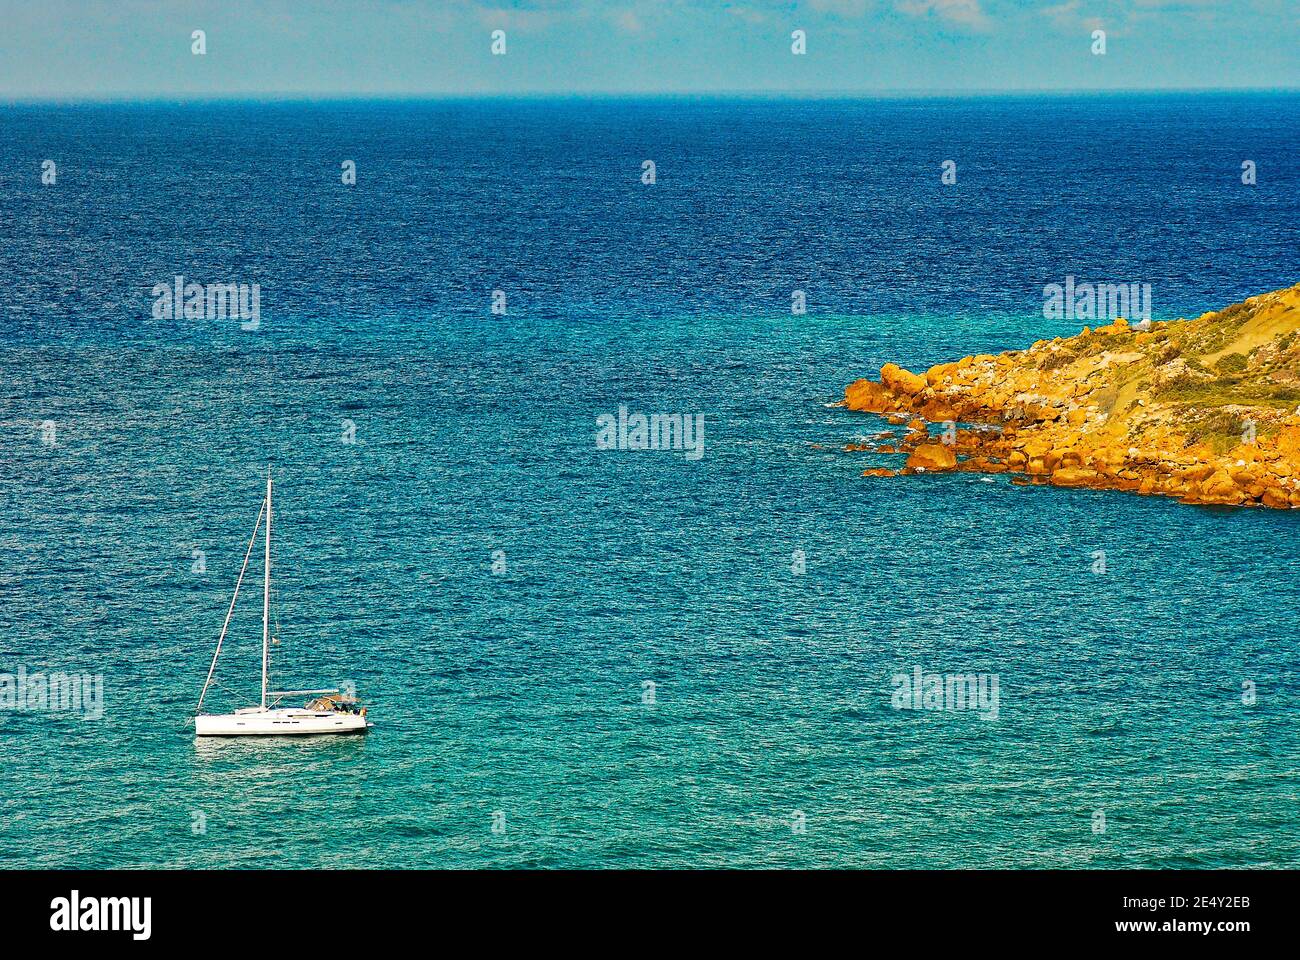 Ramla bay view on Mediterranean sea with the rocky shore and sailing boat around Maltese islands Stock Photo